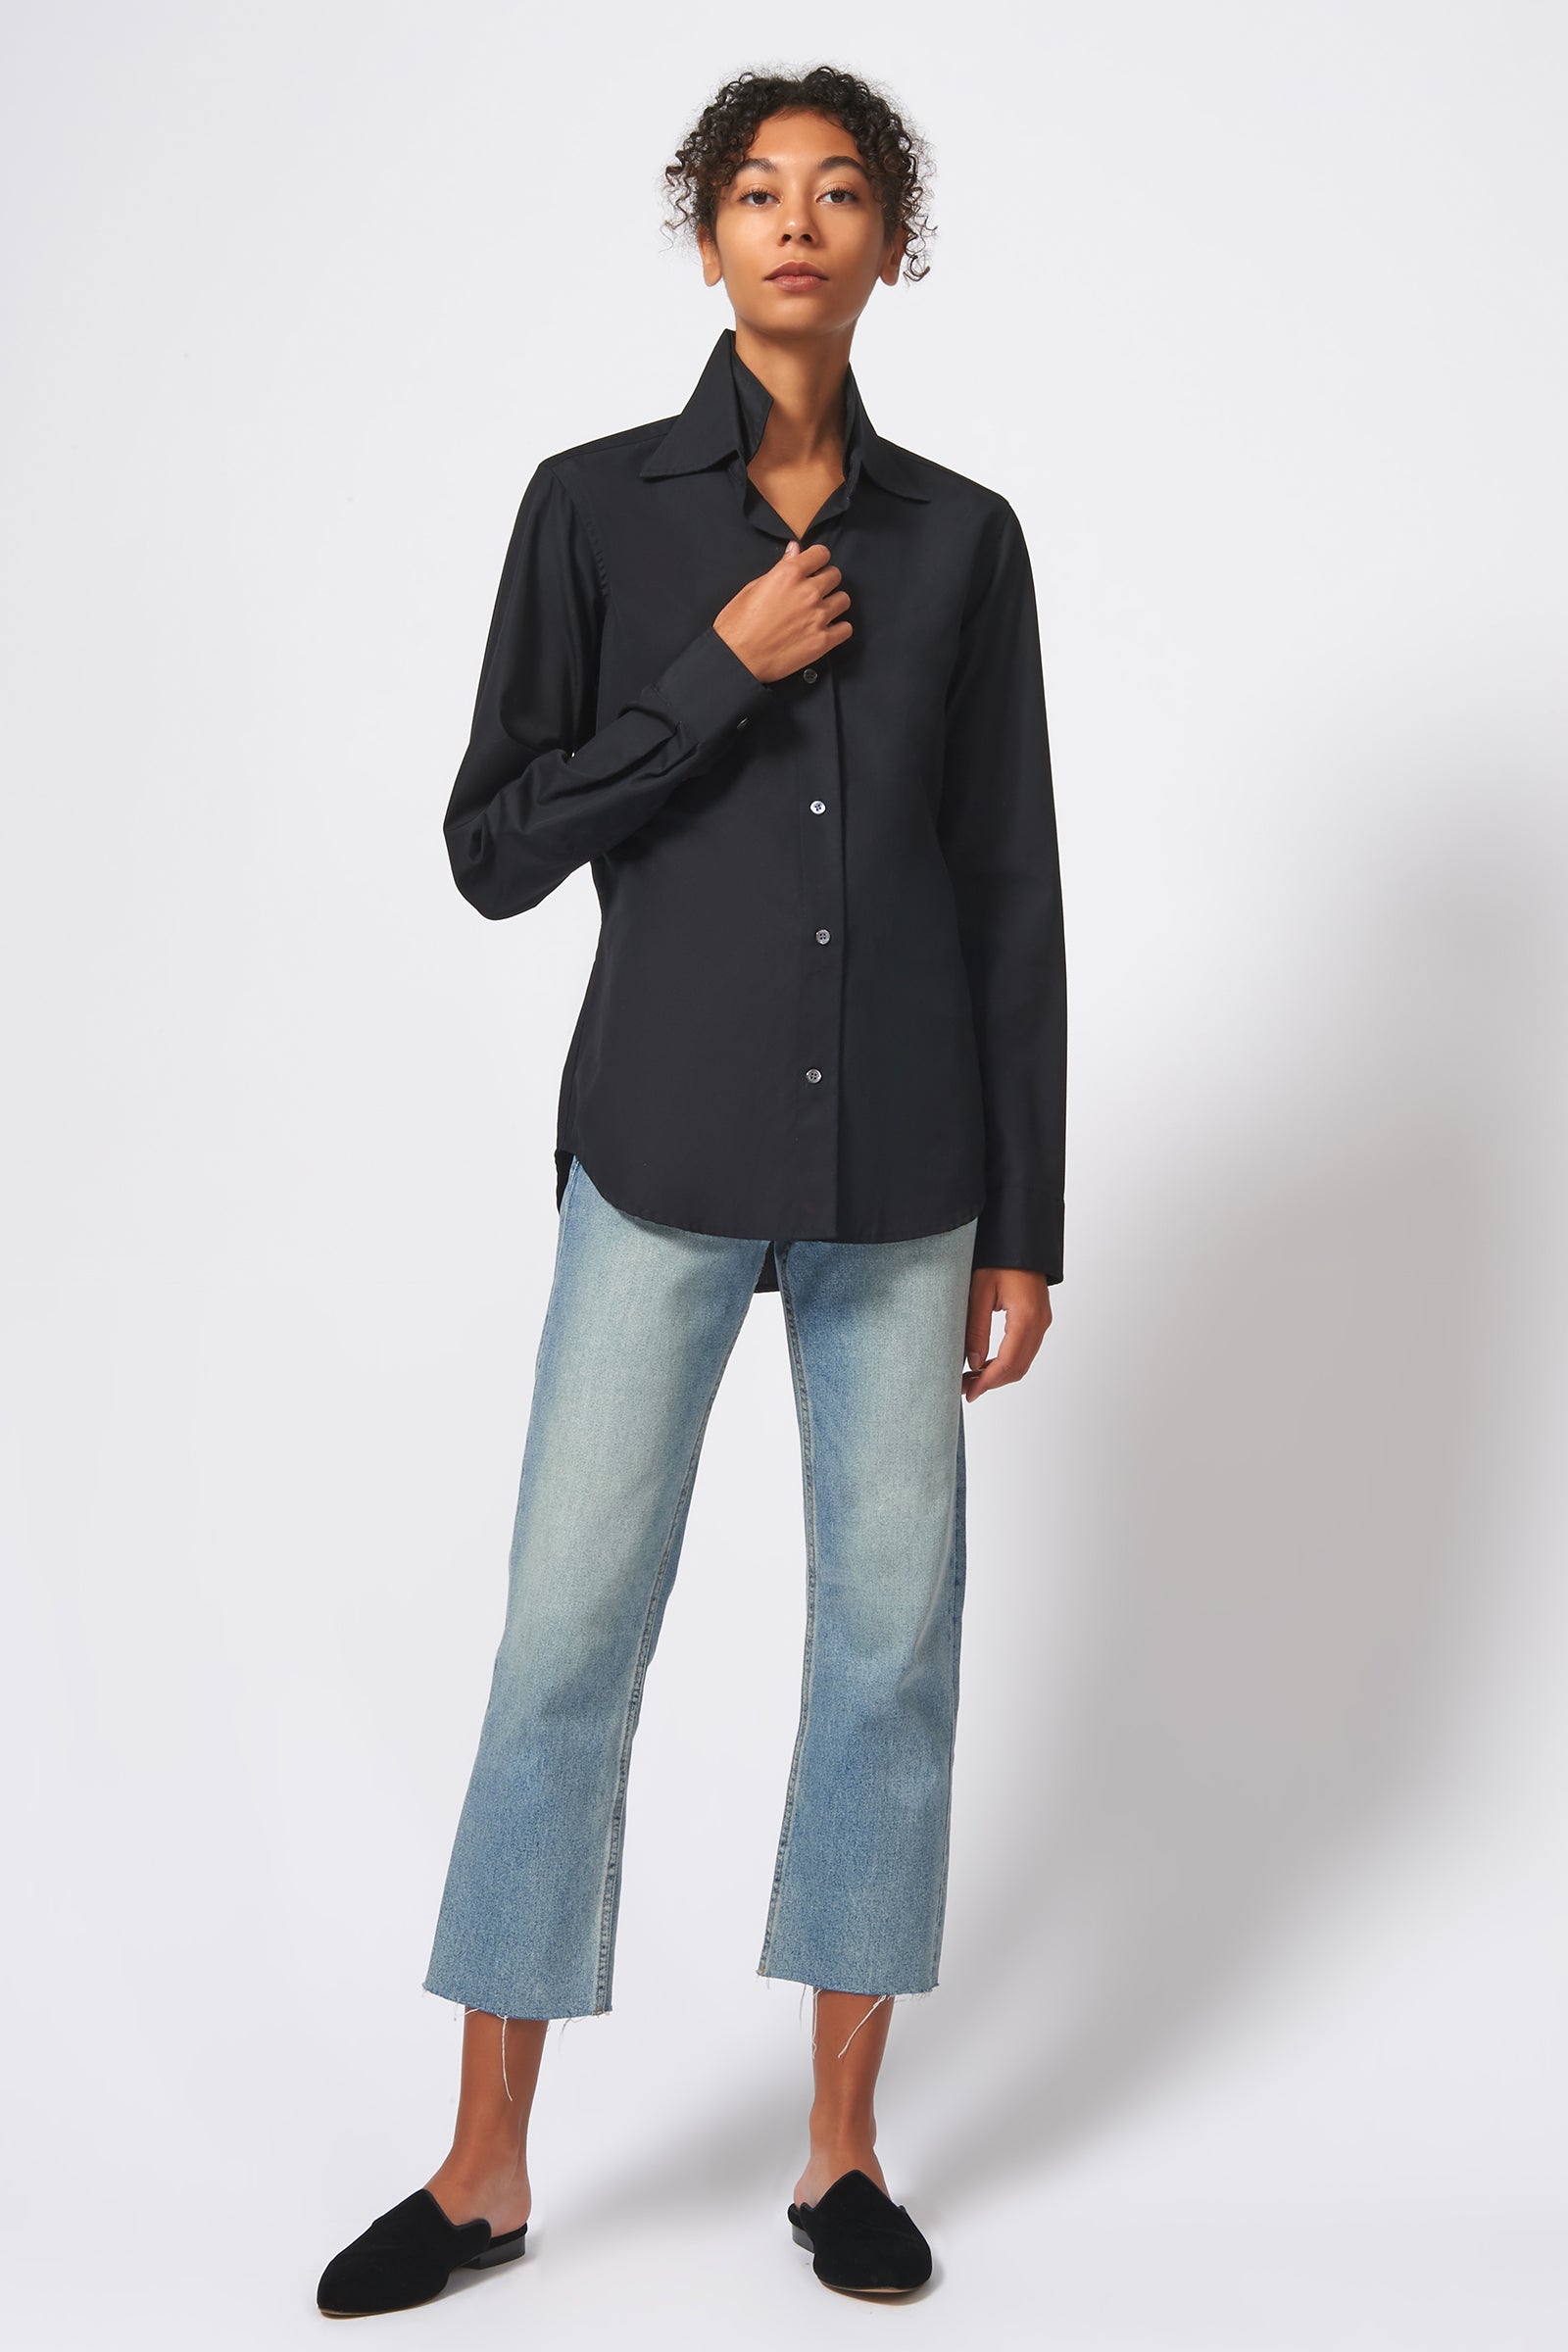 Kal Rieman Double Collar Shirt in Black Ottoman on Model Full Front View